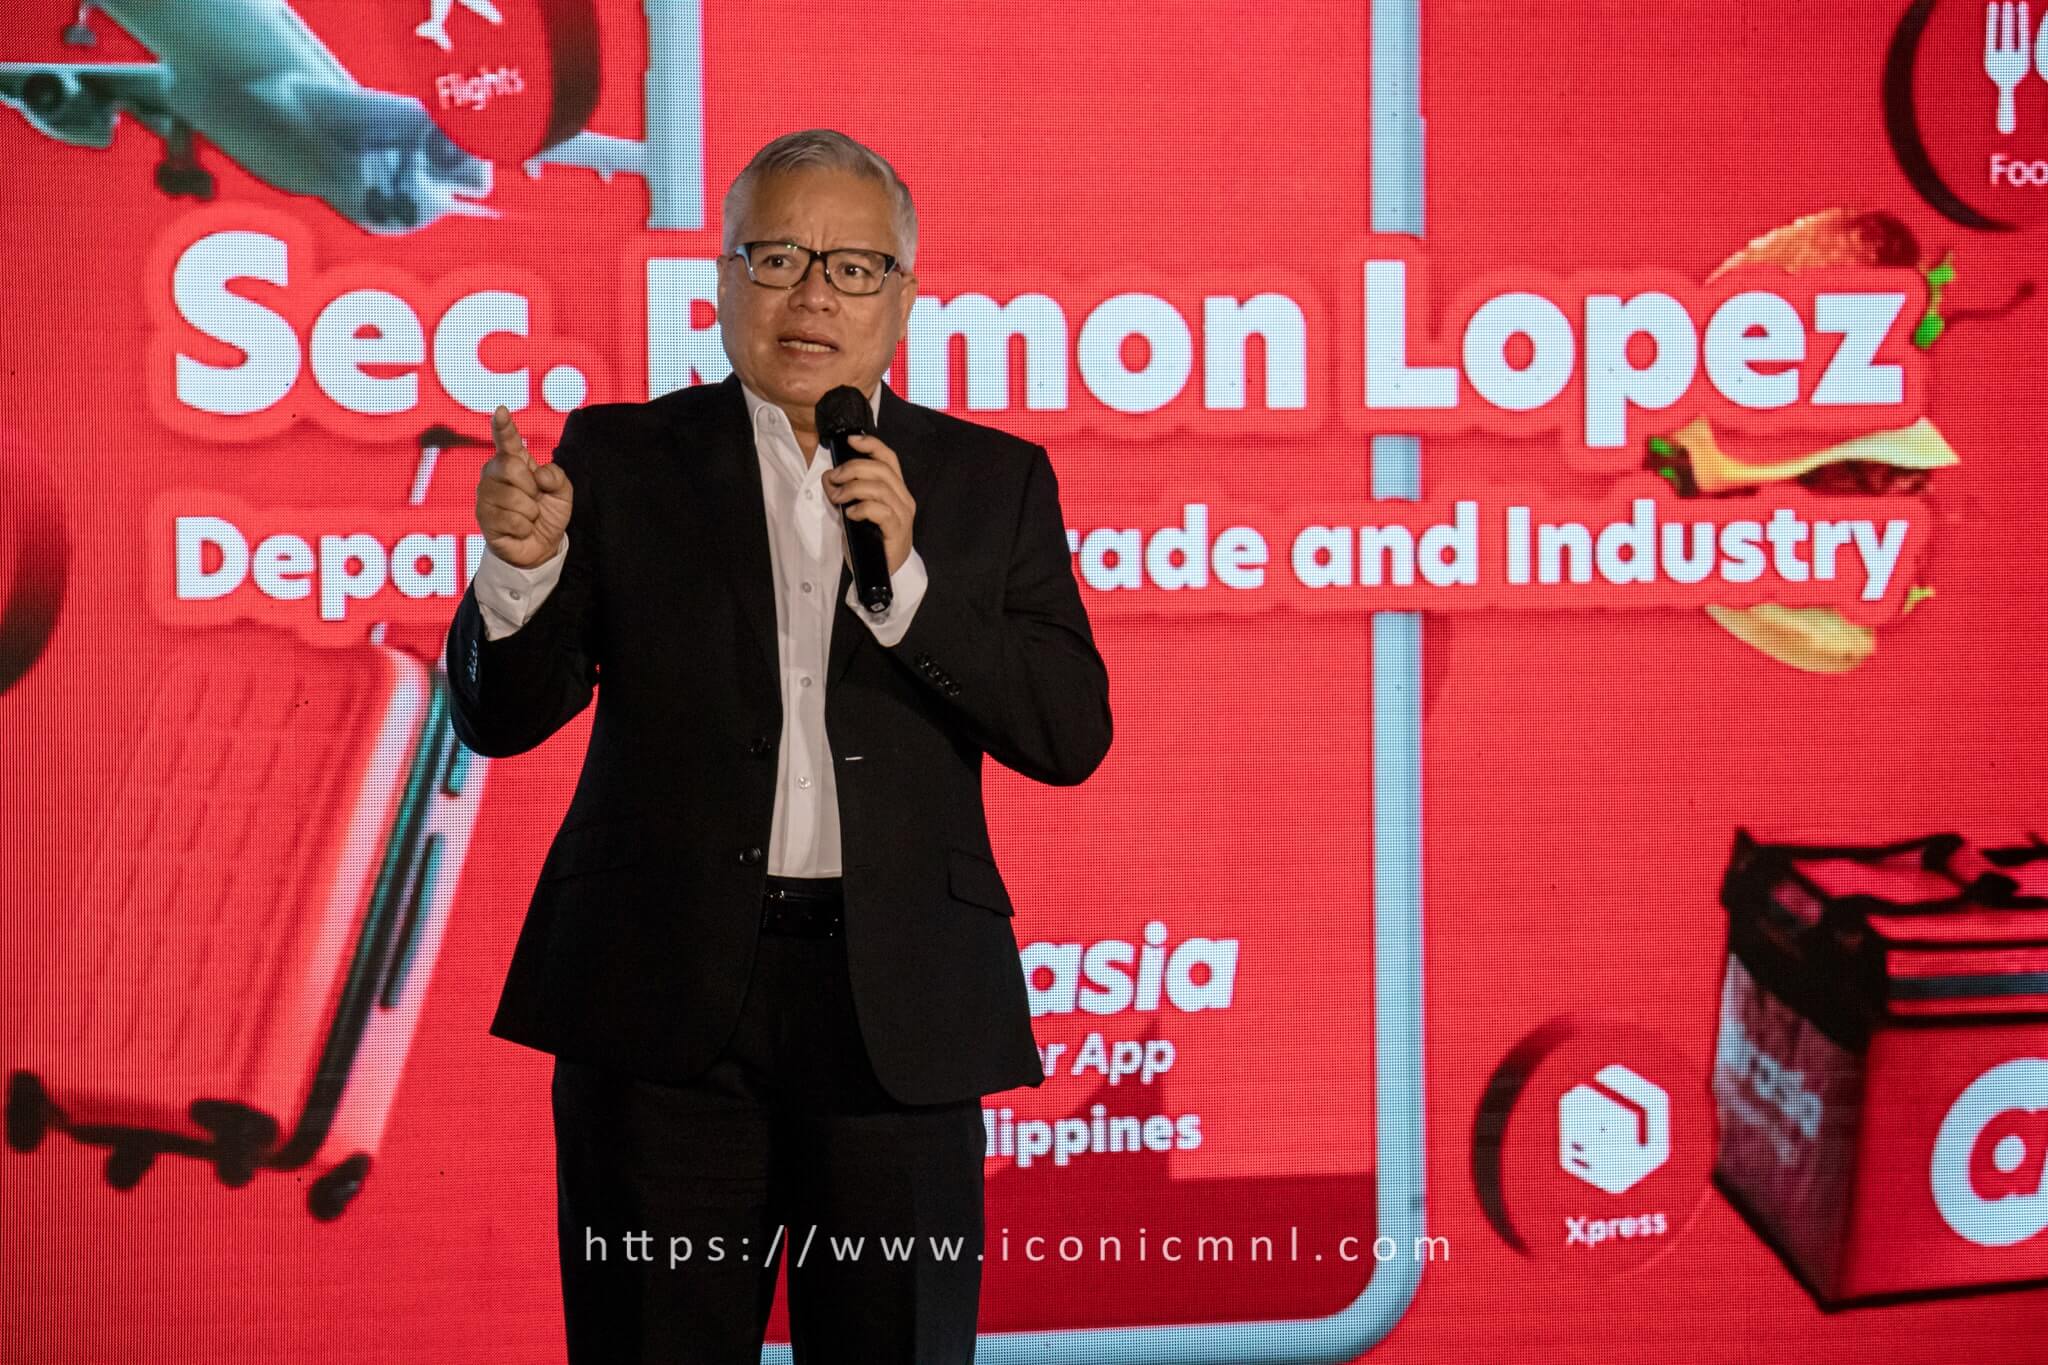 airasia Super App officially launched in PH - Sec. Ramon Lopez